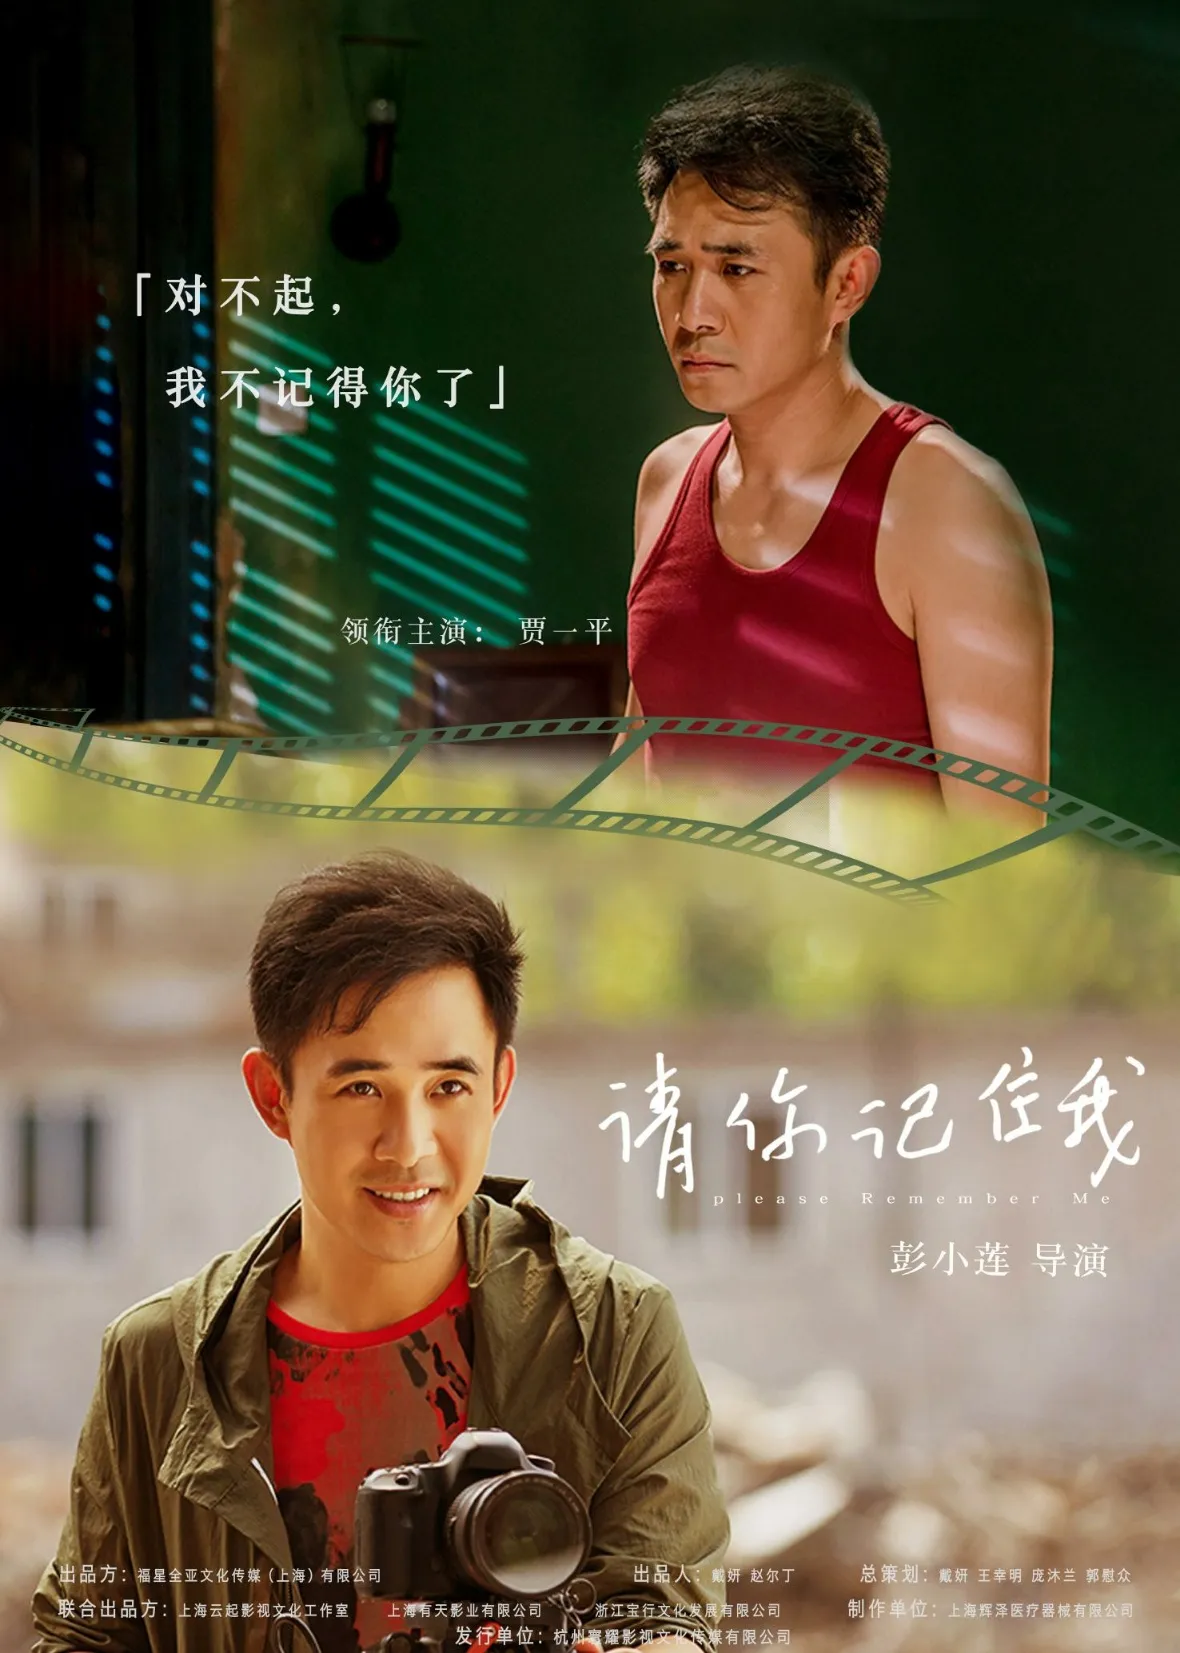 'please remember me' actor Jia yiping.jpg